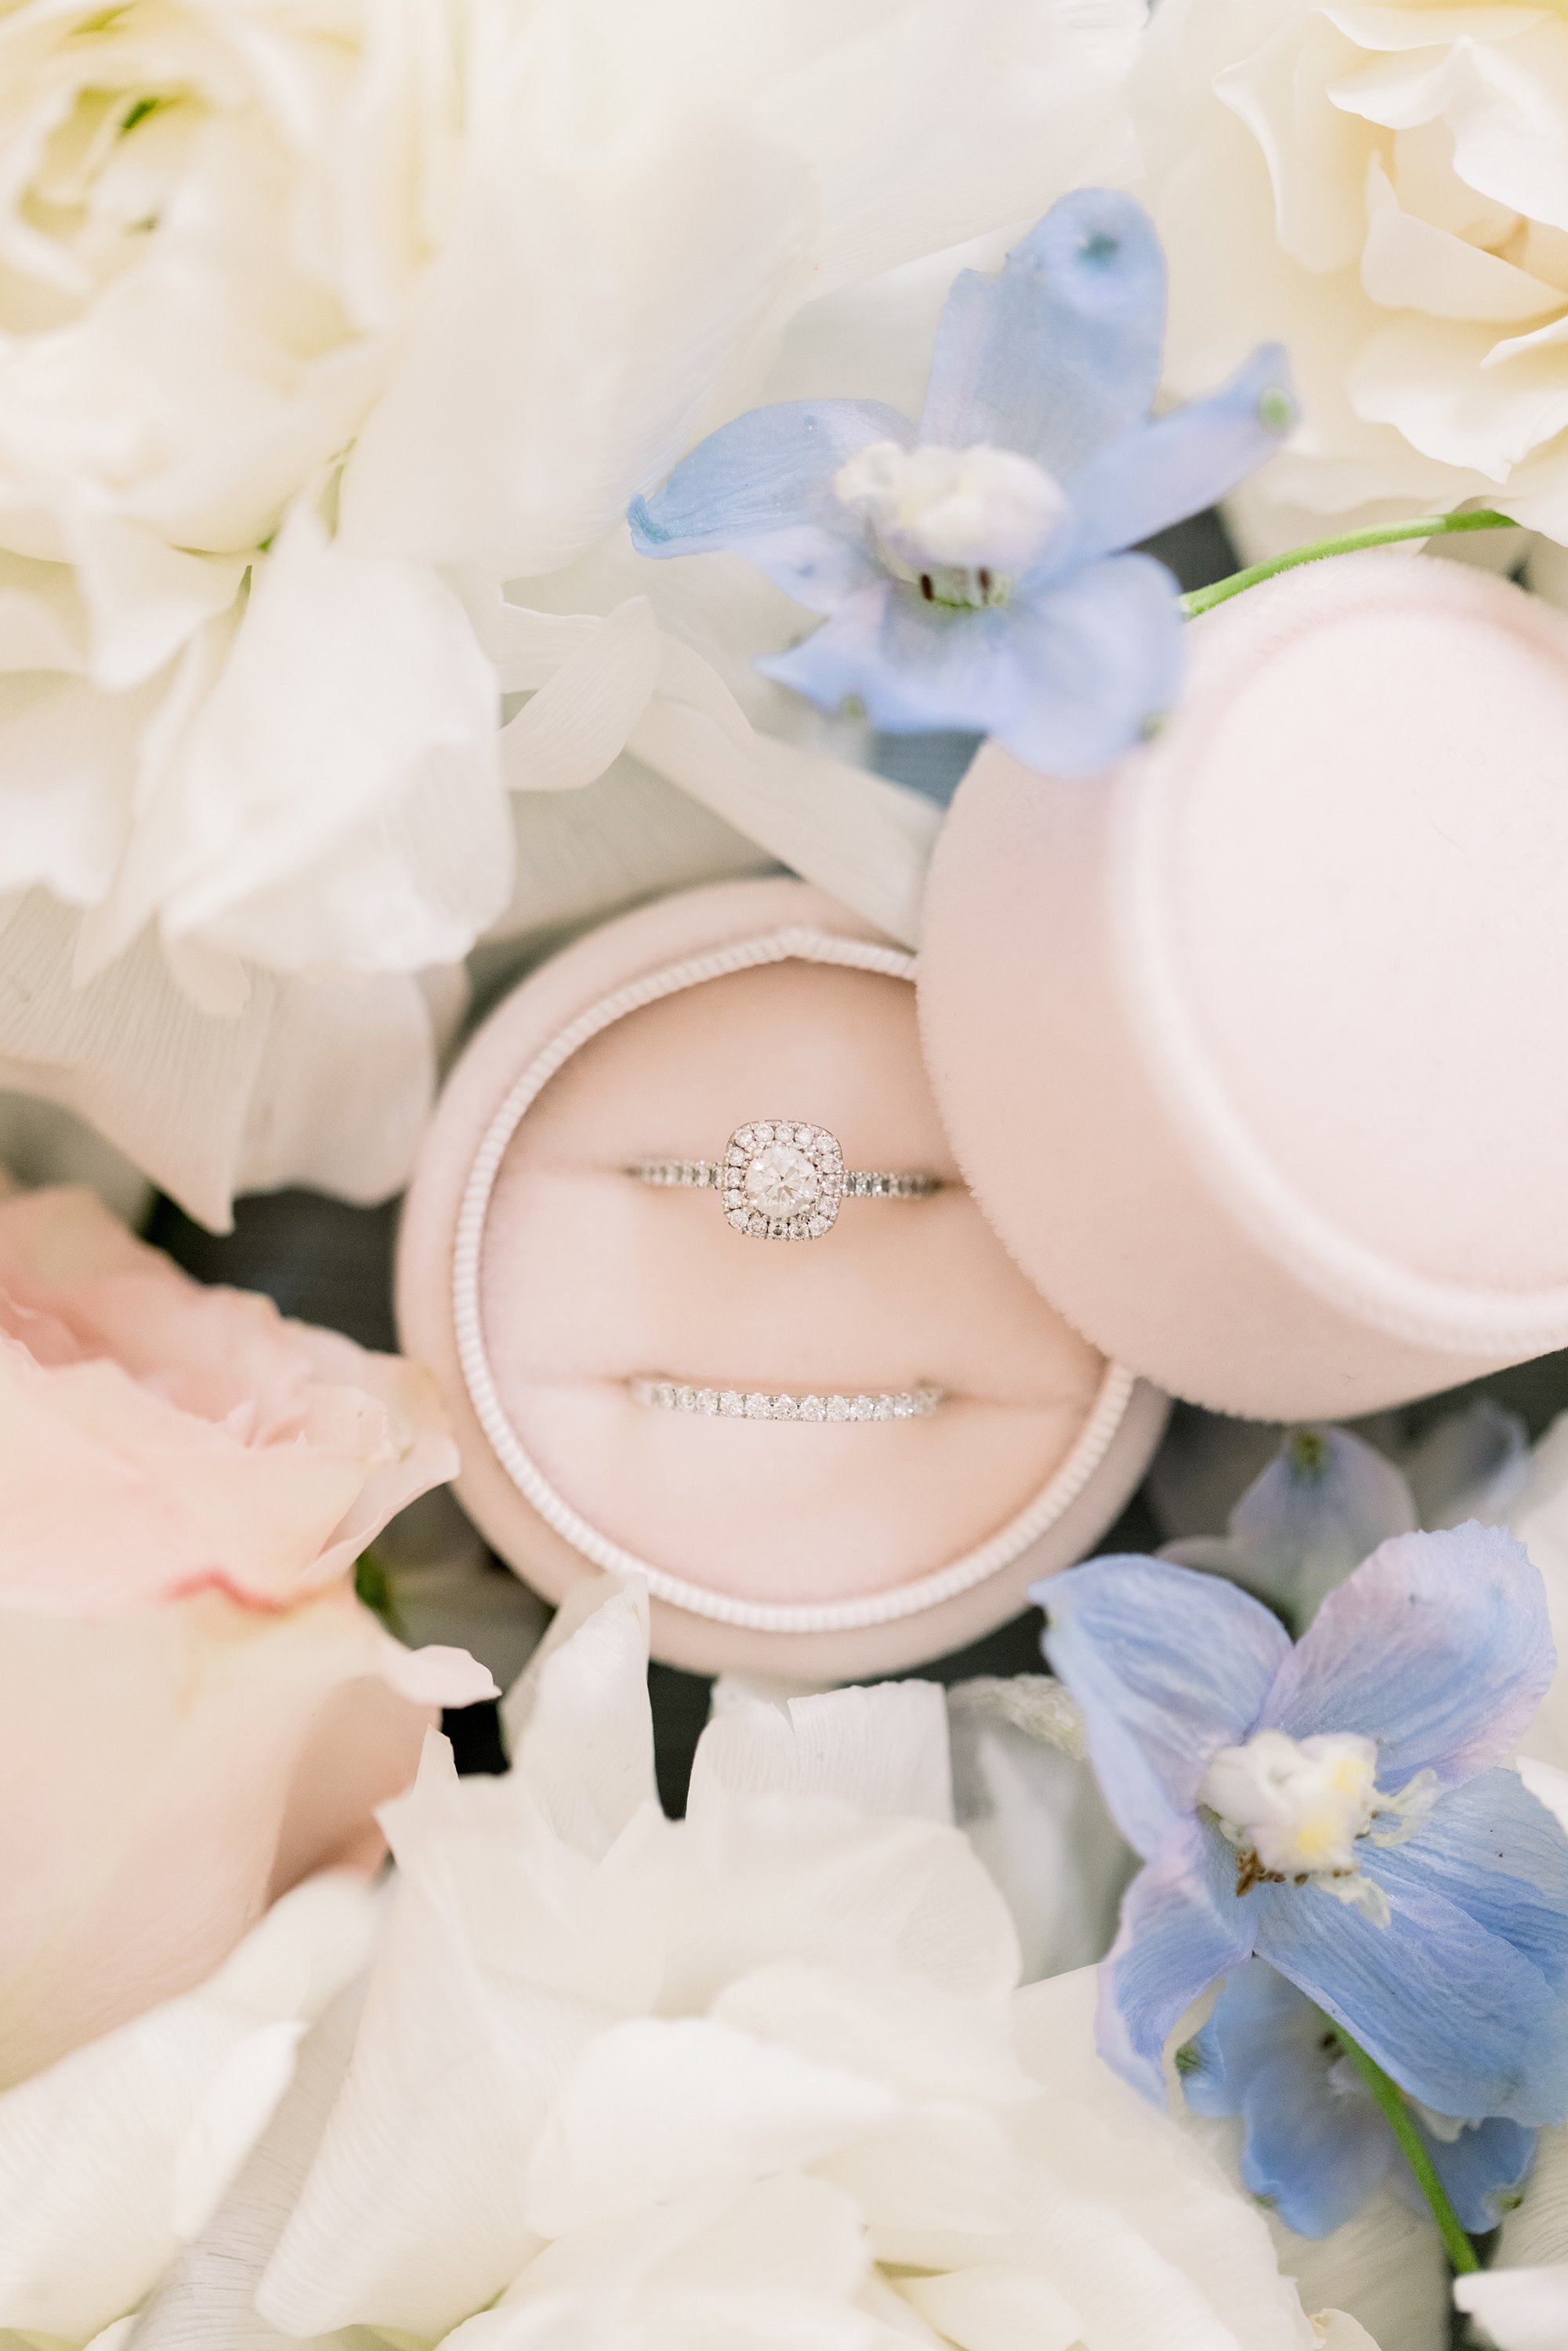  Silver vintage wedding rings in a blush pink box by Chelsea Mason Photography. bridal ring pink box spring florals for wedding #ChelseaMasonPhotography #ChelseaMasonWeddings #WakefieldWeddings #LeBelvedere #Wakefieldweddingphotographers 